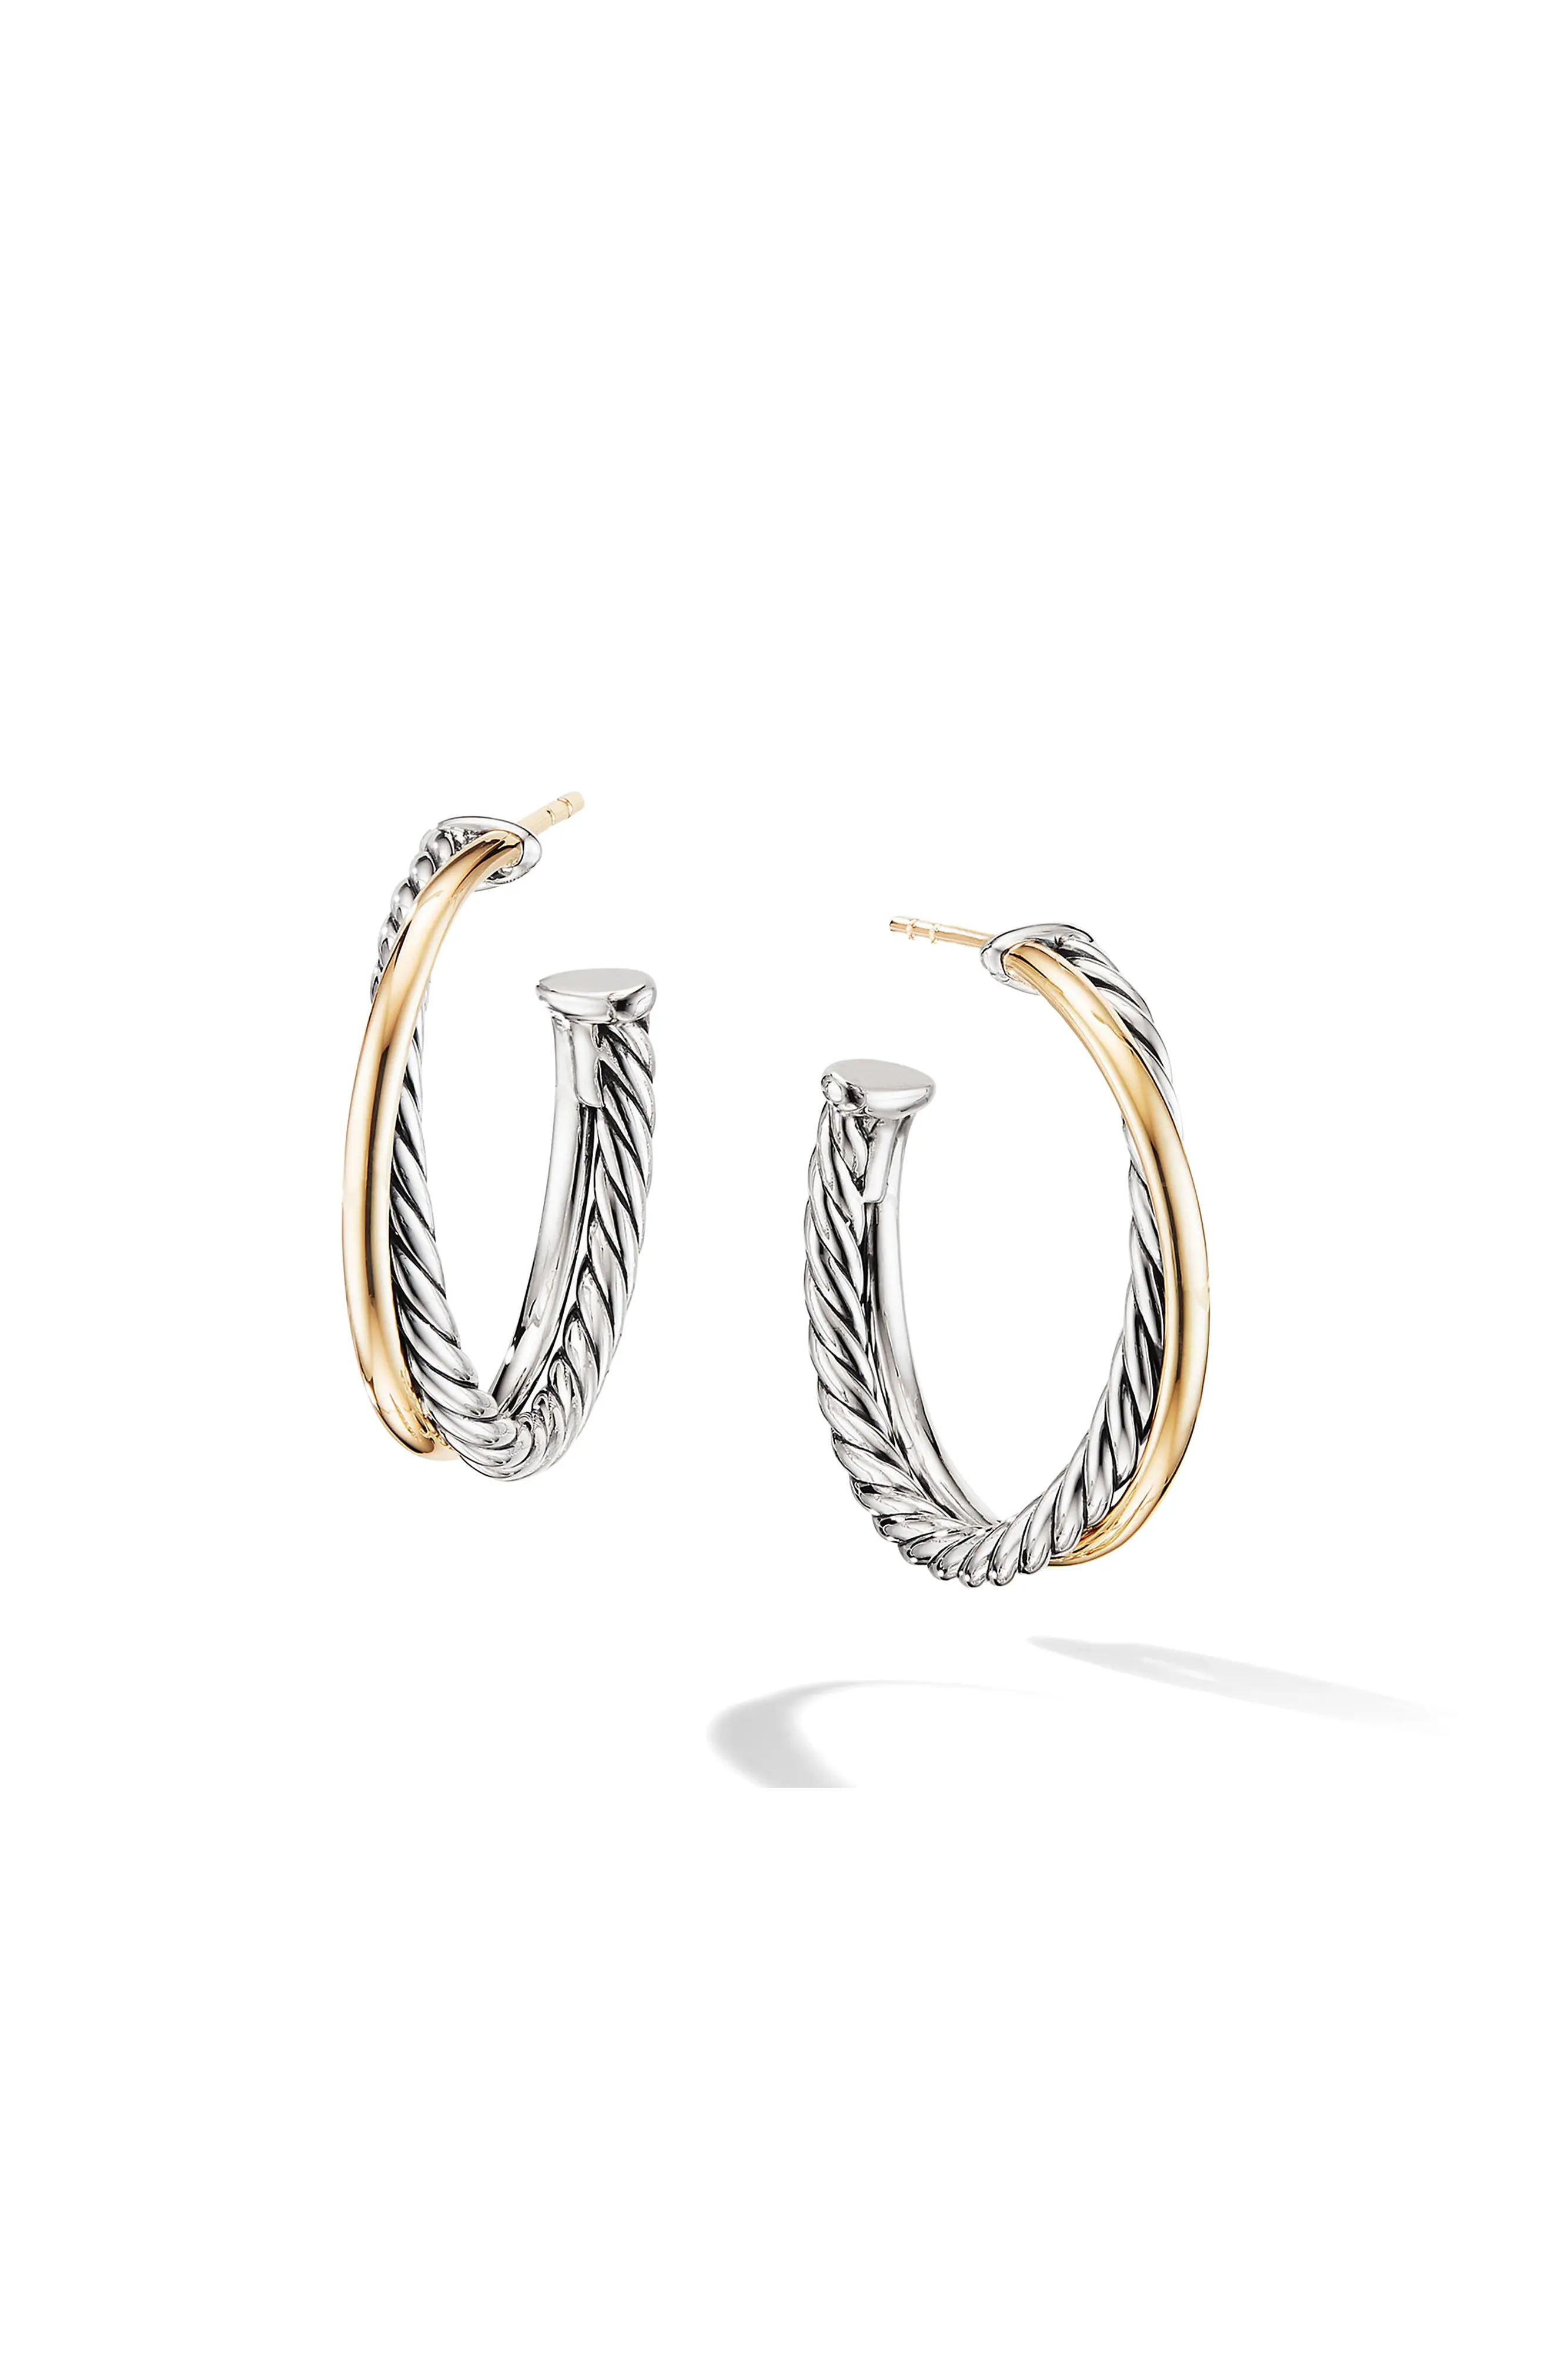 David Yurman Crossover Medium Hoop Earrings with 18K Yellow Gold in Silver/Gold at Nordstrom | Nordstrom